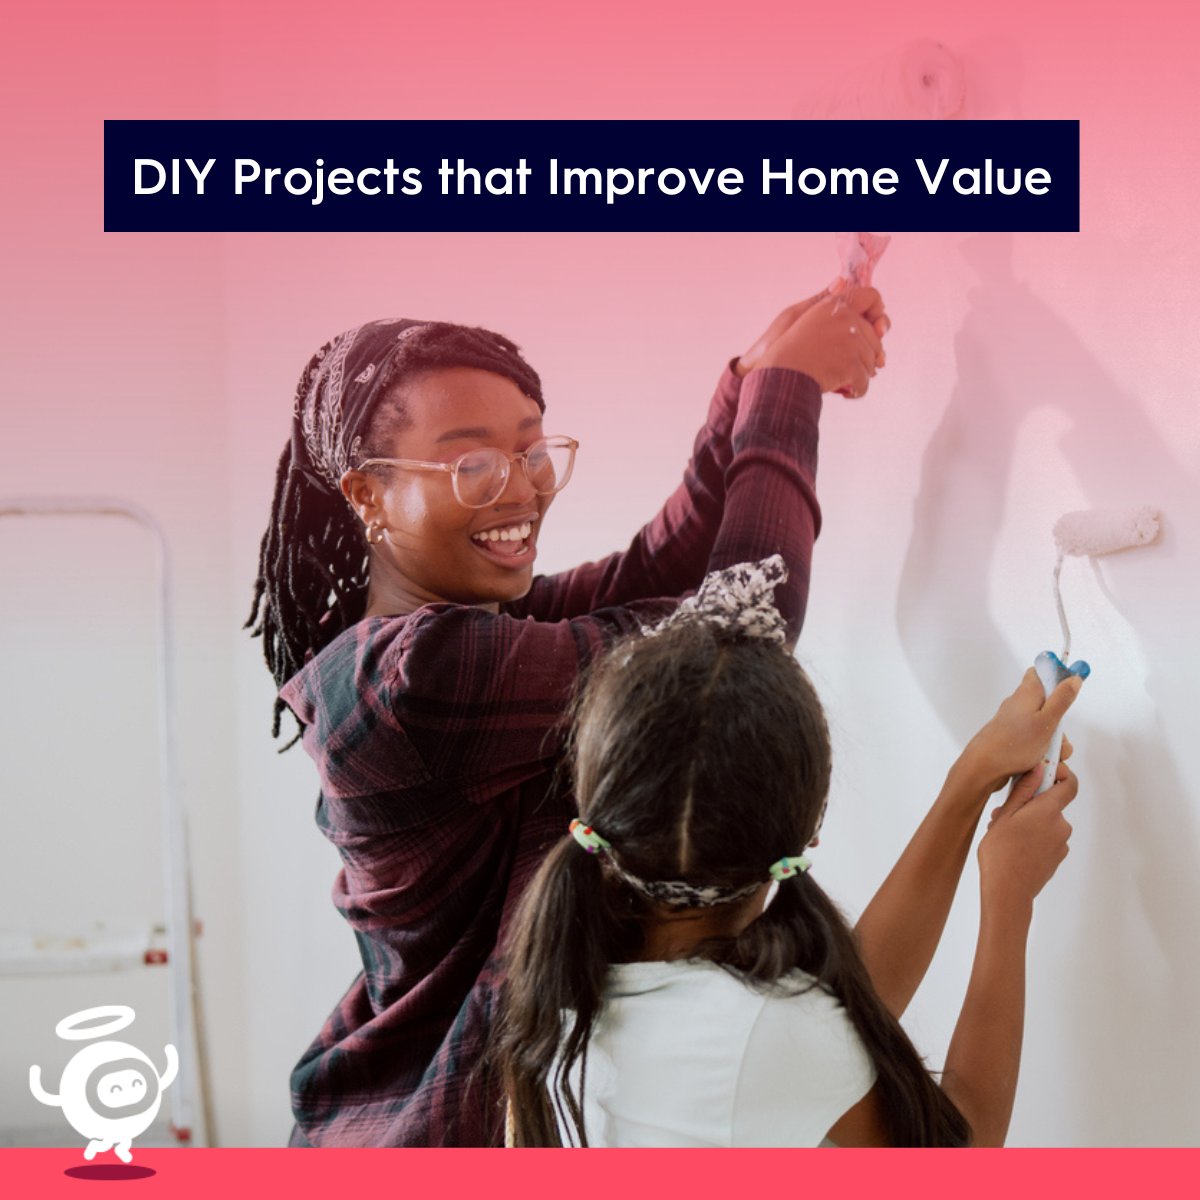 #MerryChristmas2023 Are you looking for few fun and creative projects to do during your Christmas break? Here are Top 10 small-scale DIY projects for your home: bit.ly/3FHFqiw #homeimprovement #homeimprovementtips #DIYprojects